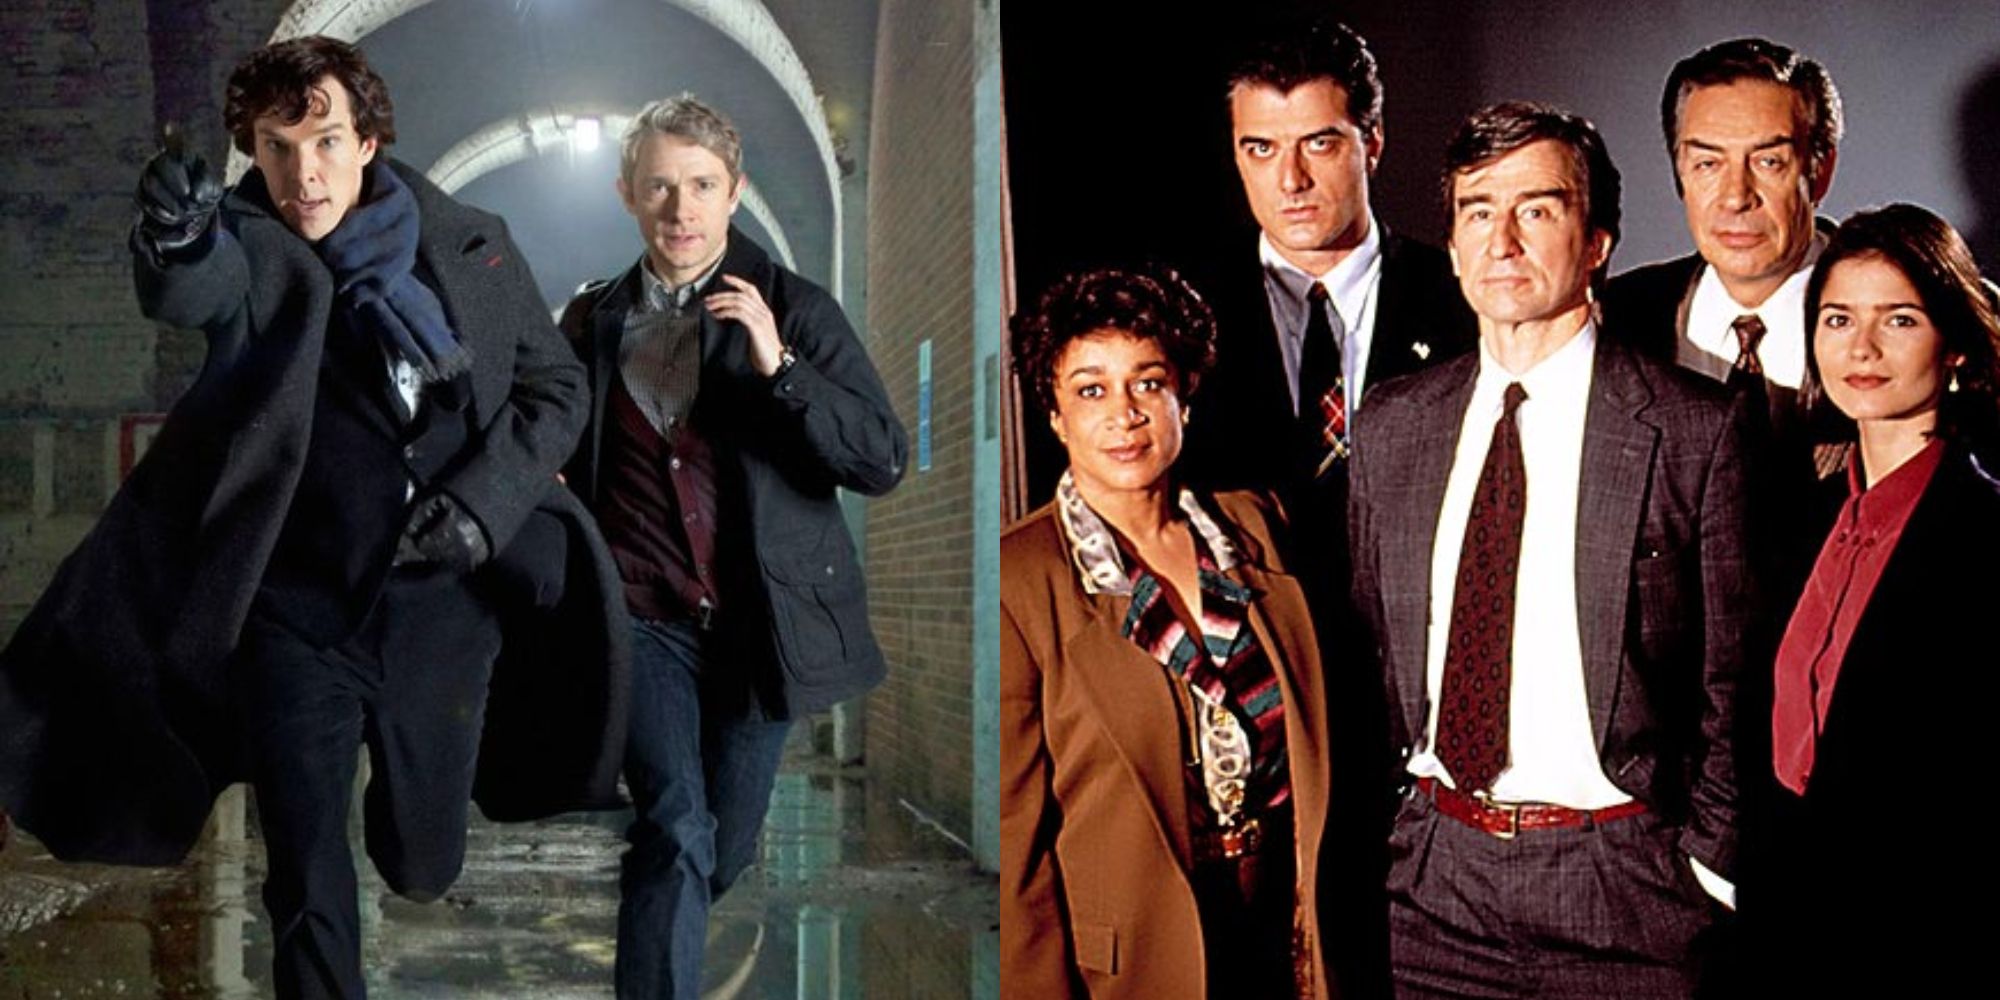 Split image showing characters from Sherlock and Law & Order.